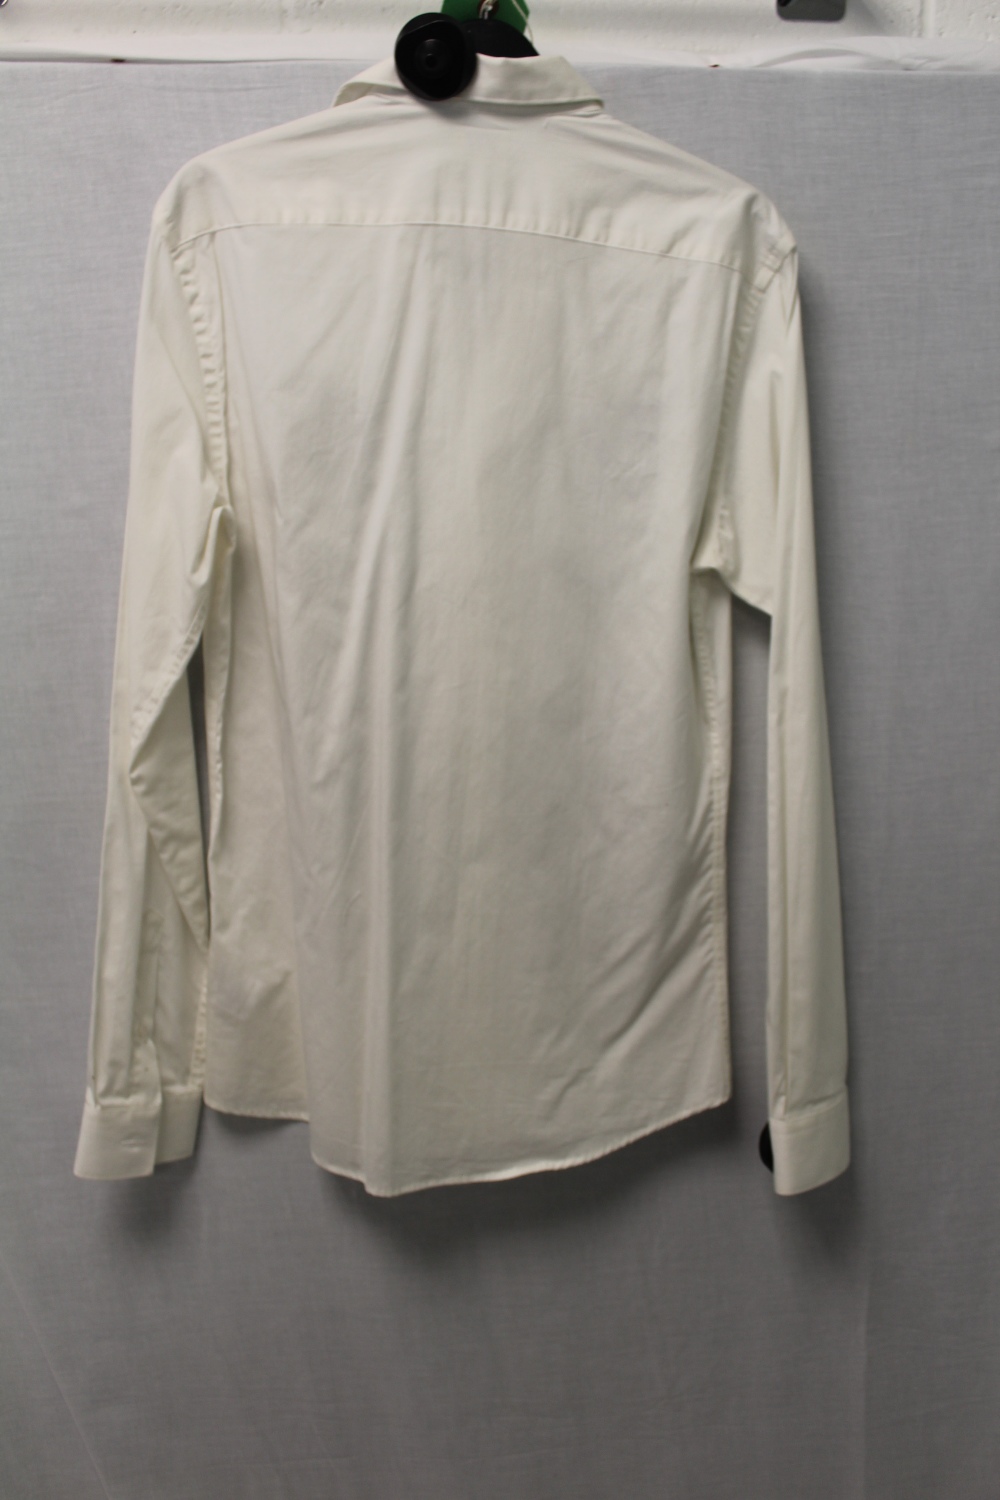 NM 328, a gents embroidered white shirt - Image 4 of 4